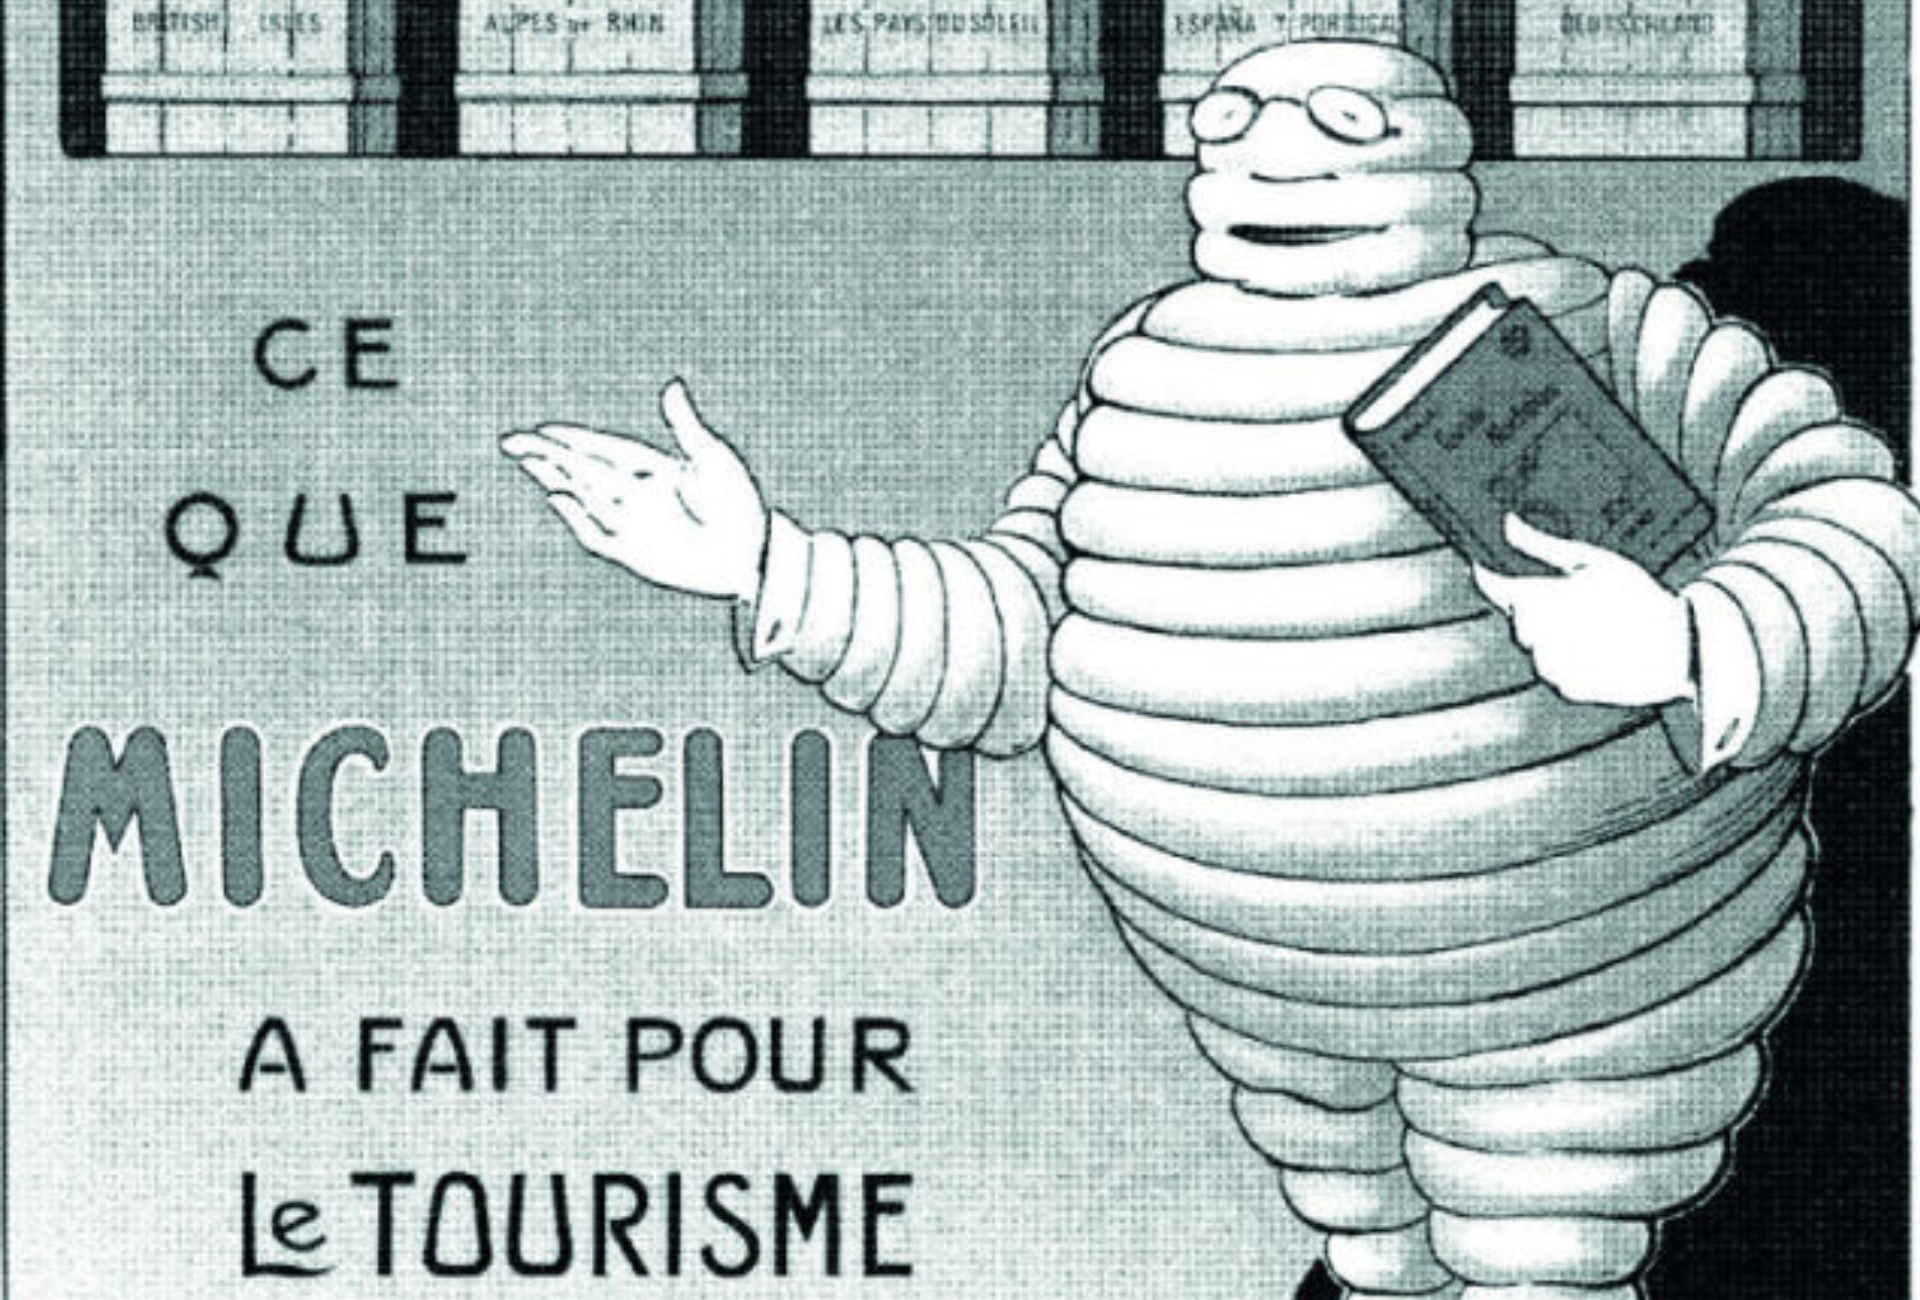 Motoring, marketing, and the story of the Michelin Man